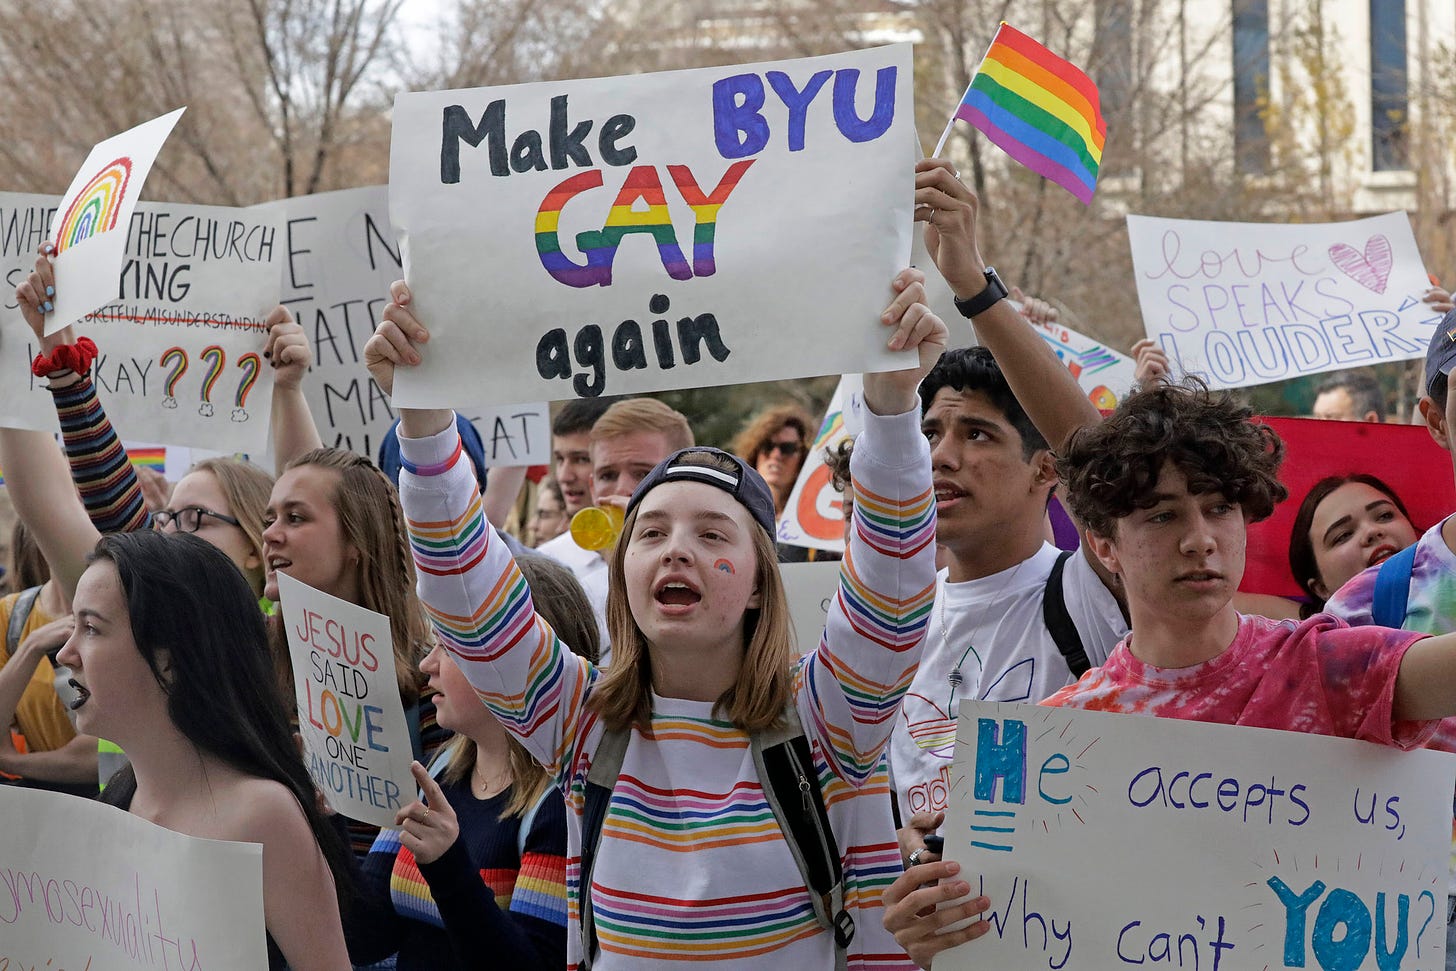 Traumatic whiplash&#39;: BYU&#39;s U-turn on homosexuality a blow to gay students